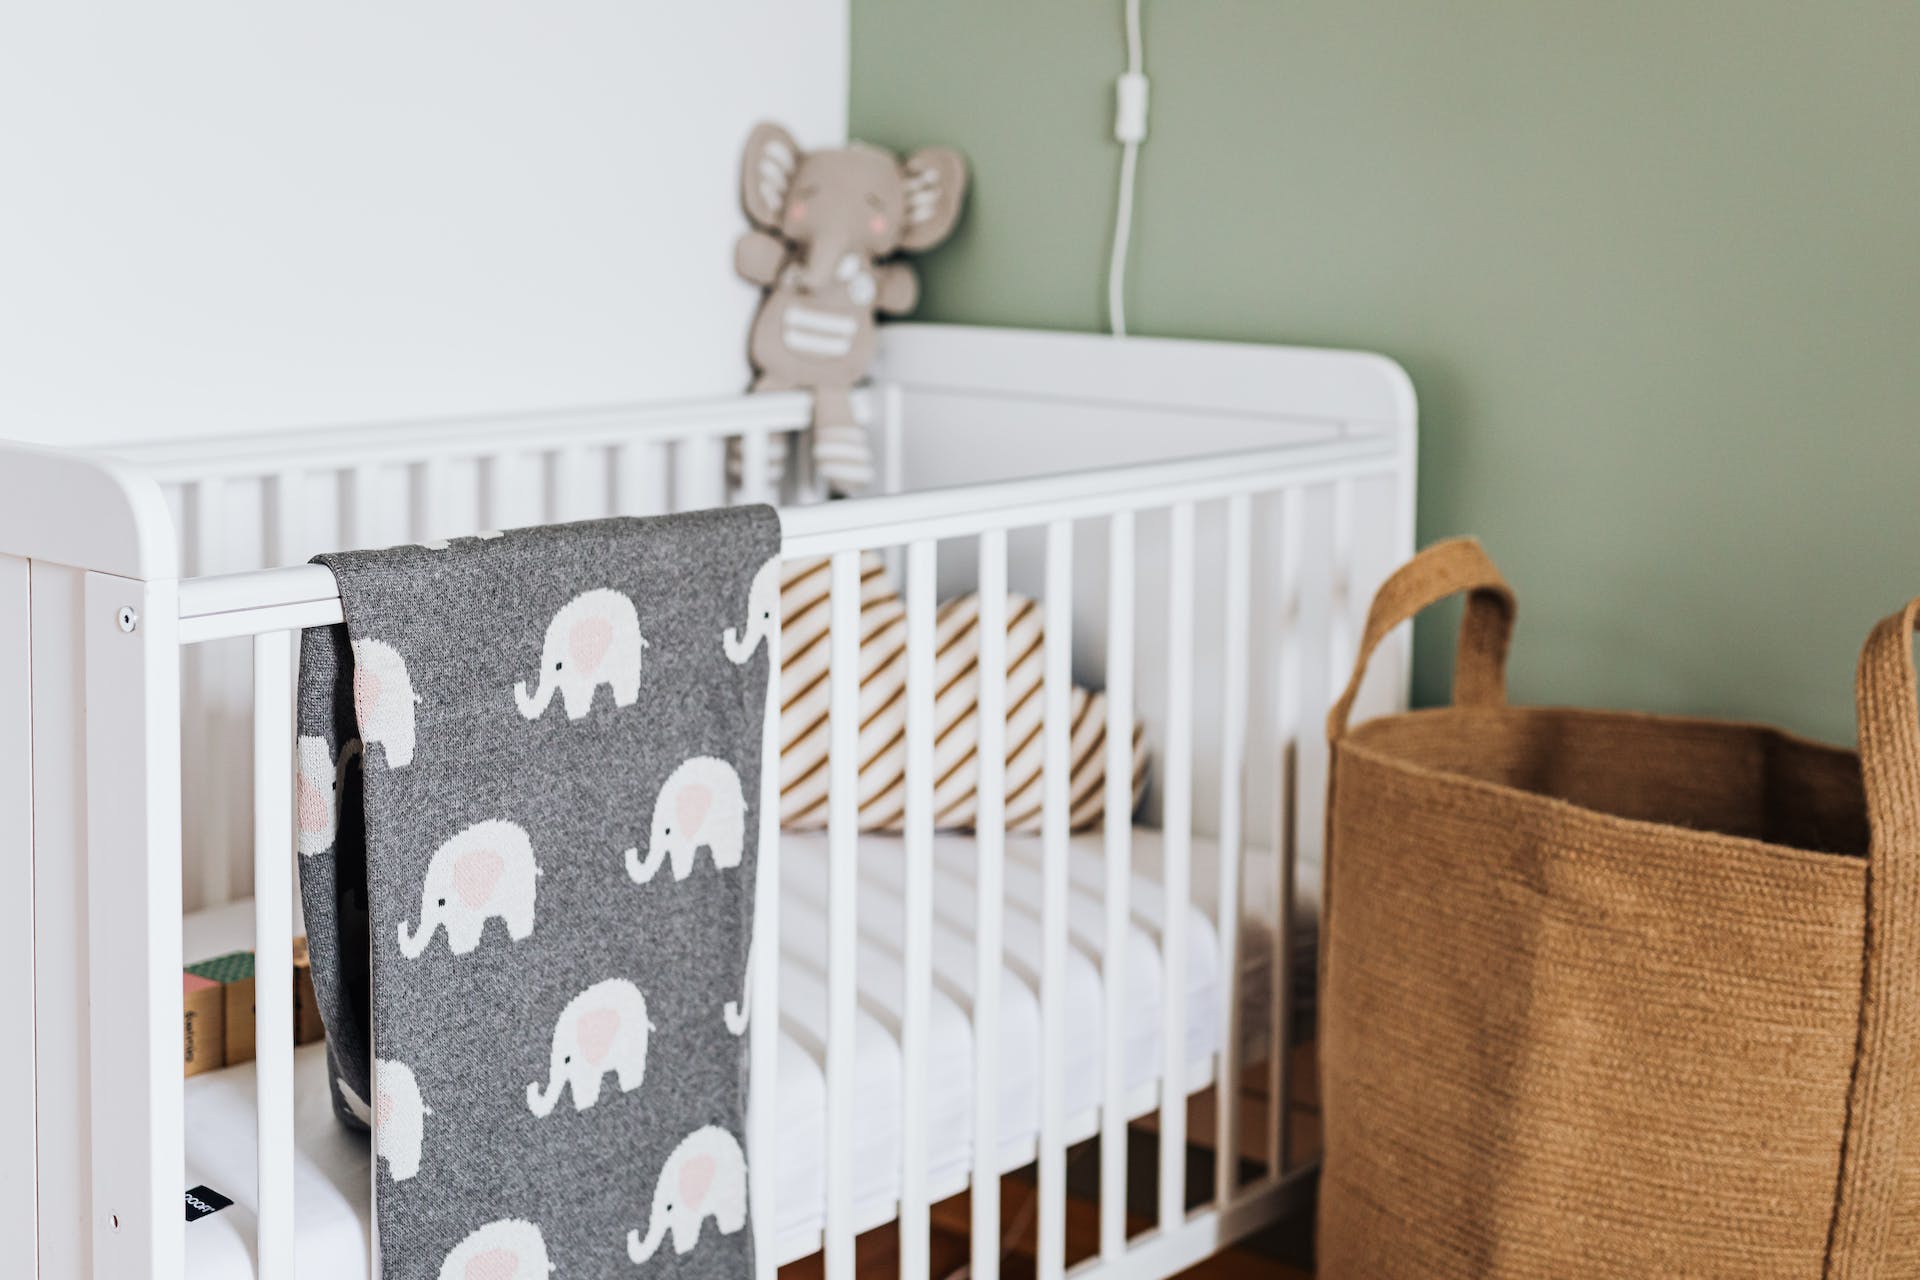 A white crib with an elephant blanket and stuffed toy | Source: Pexels